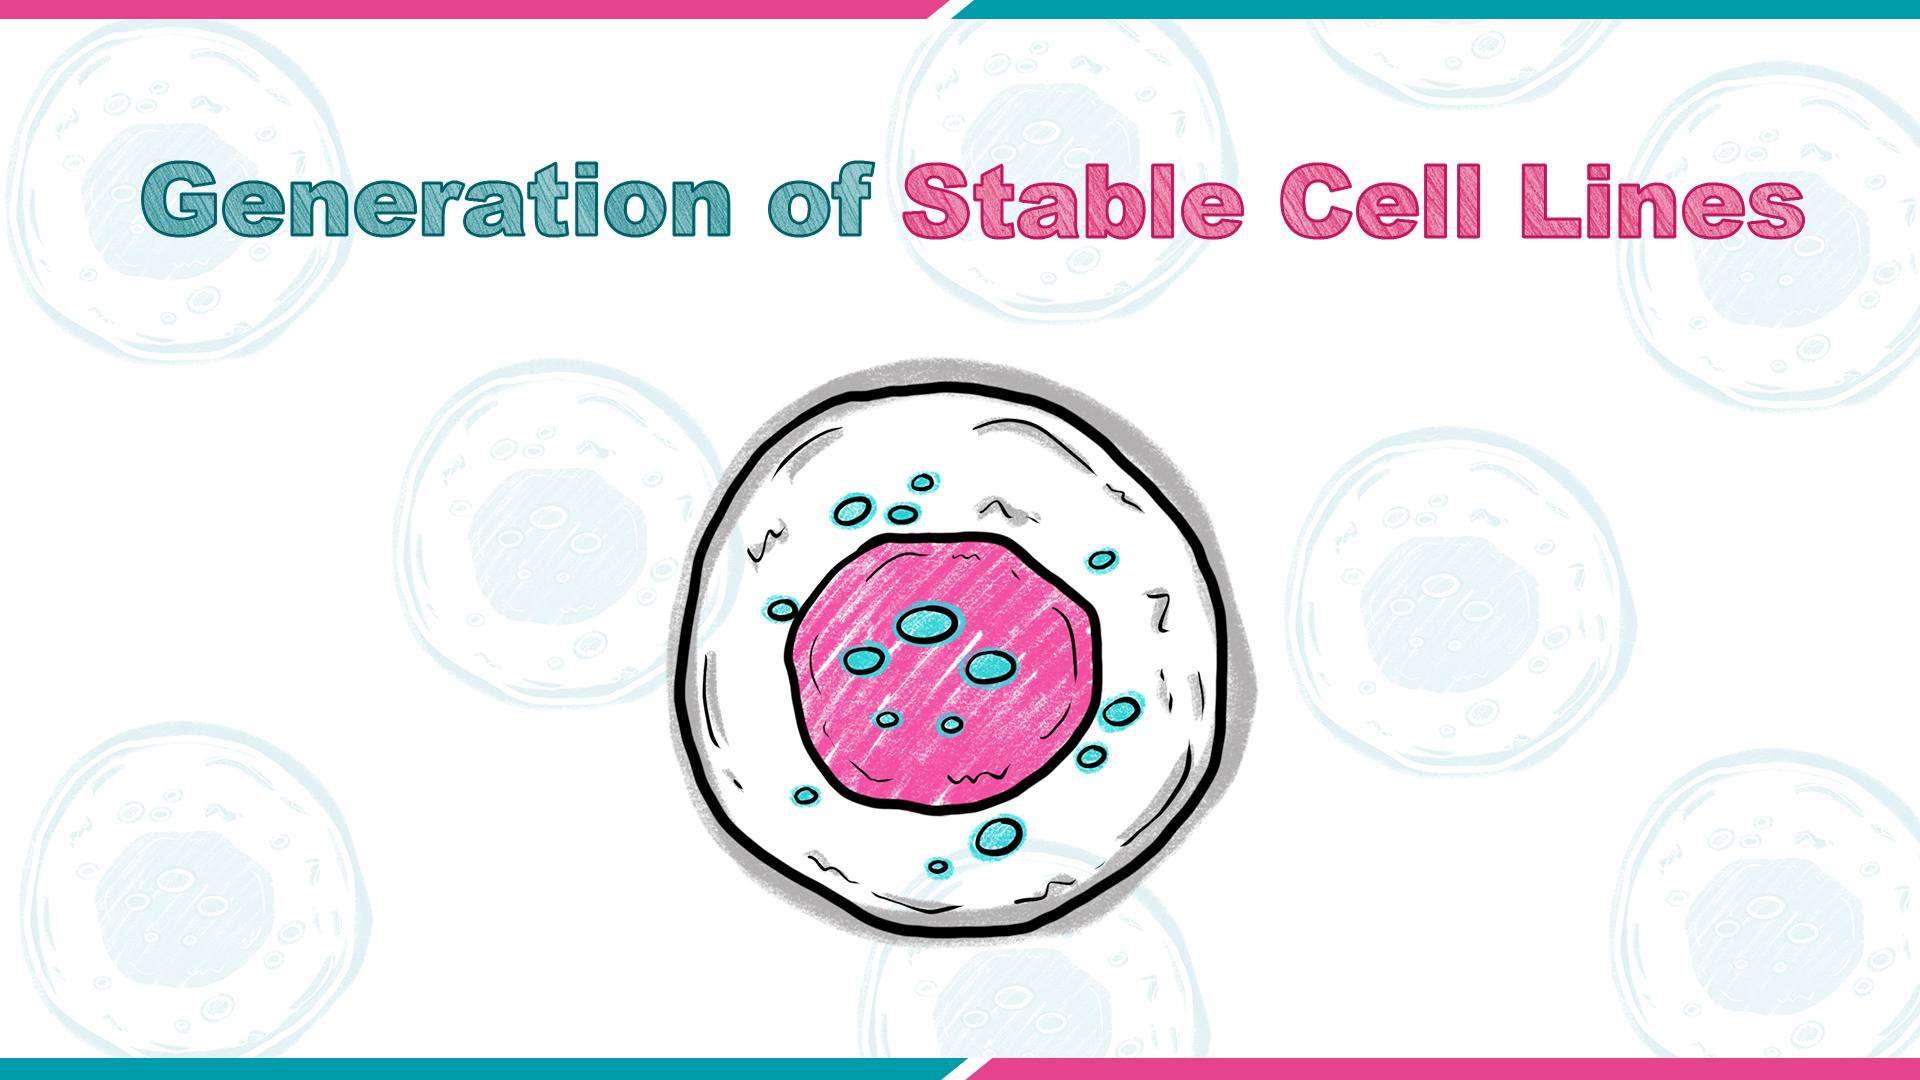 Generation of Stable Cell Lines_VectorBuilder